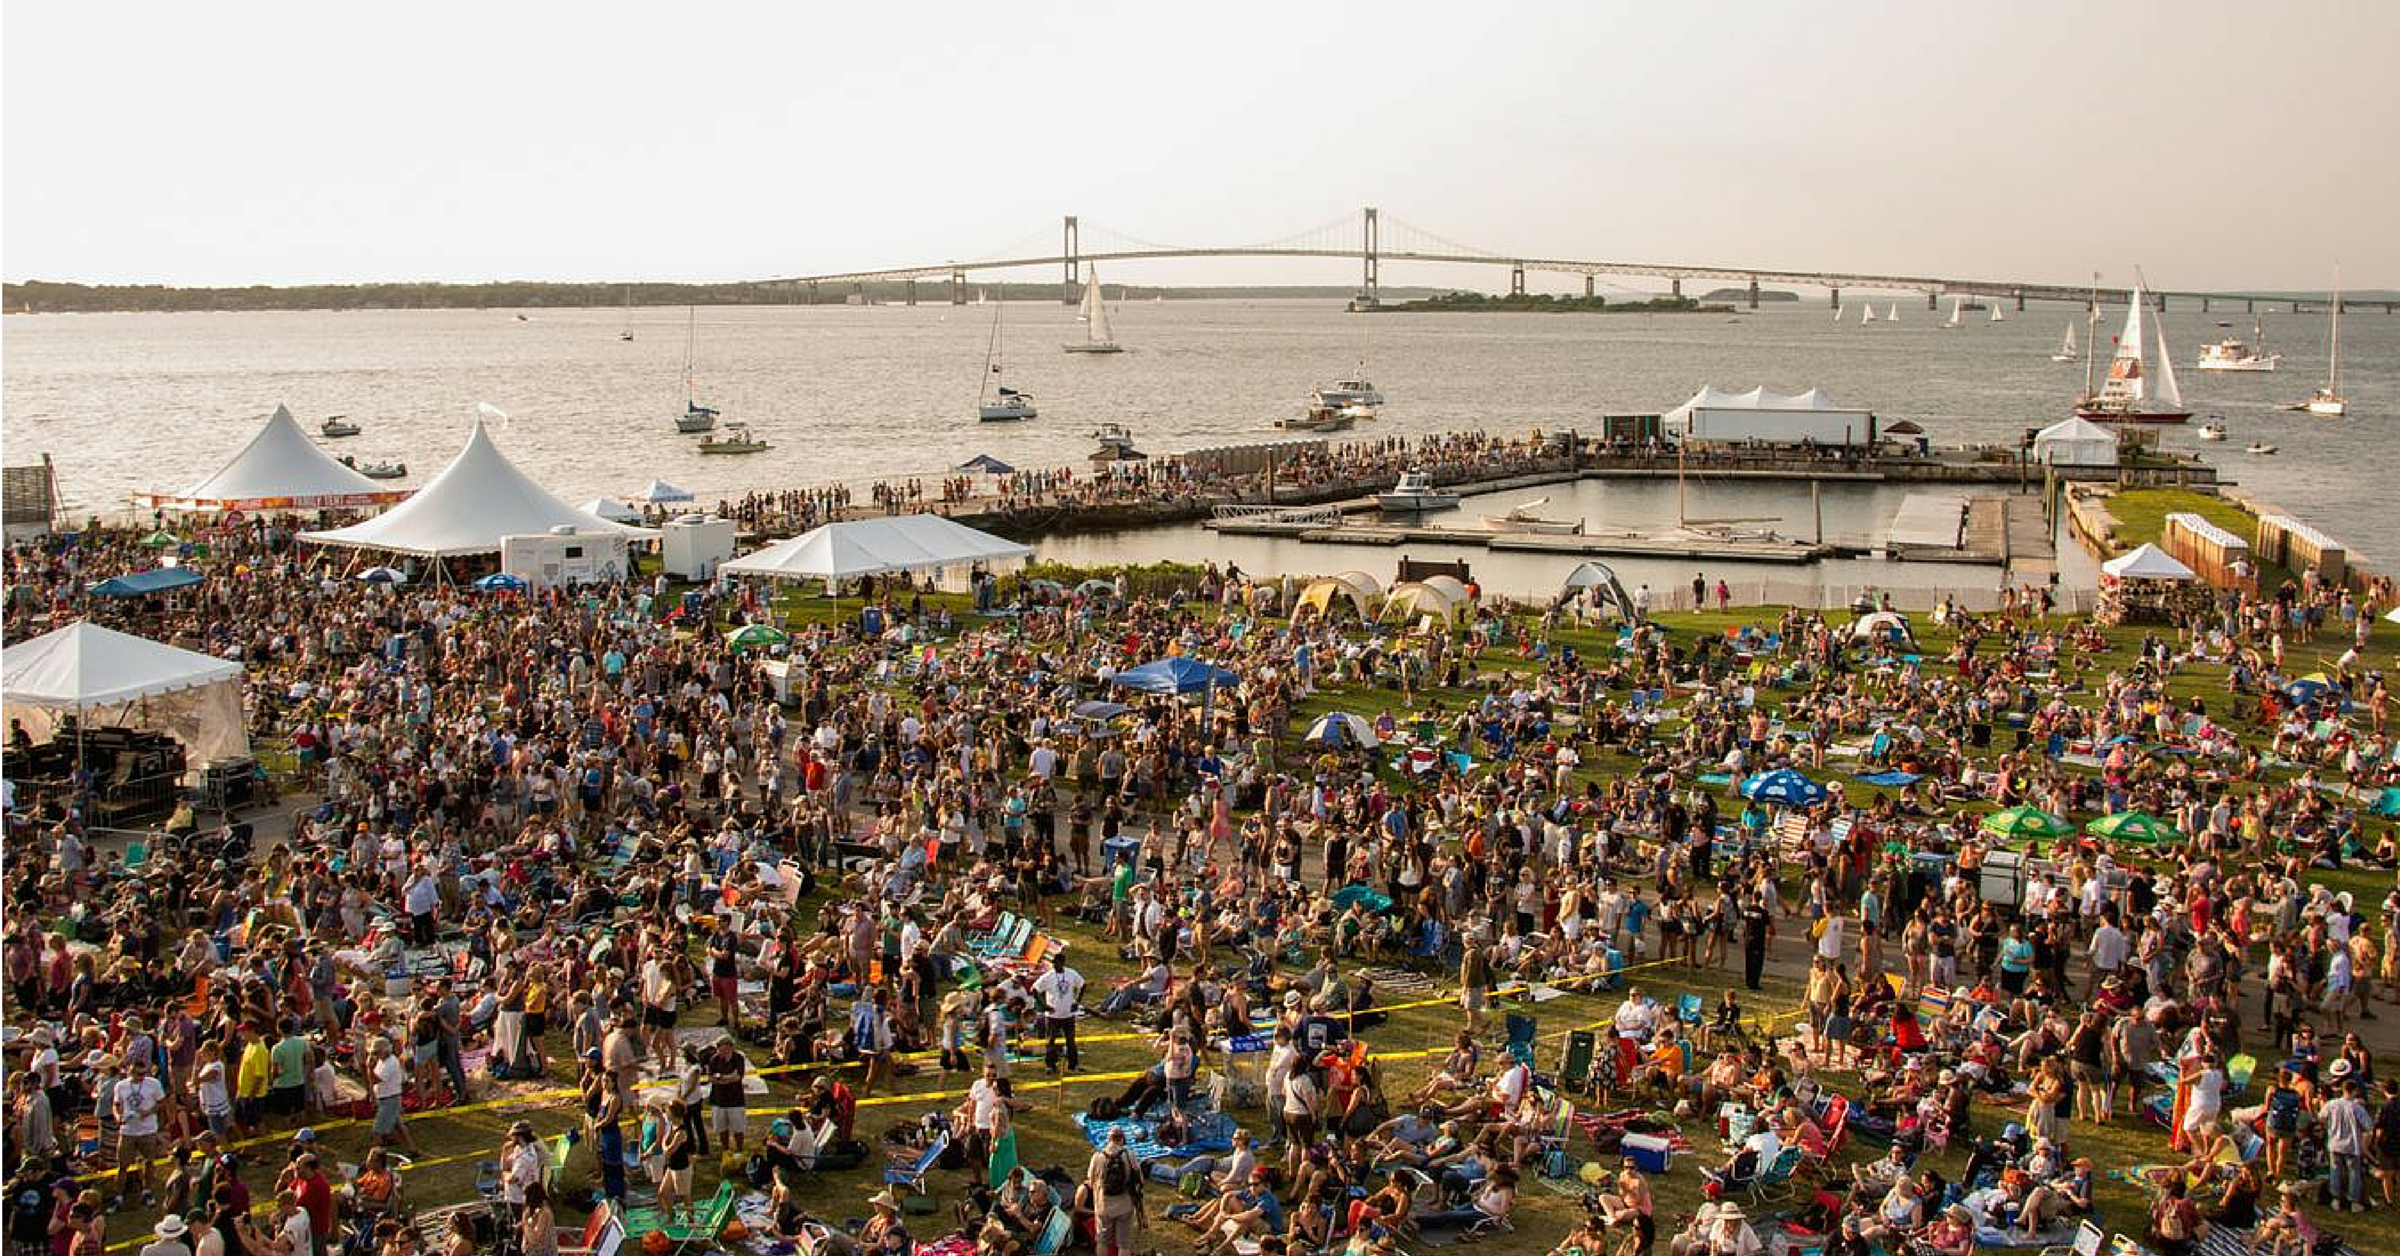 Newport Folk Festival: How to boat up to the festival